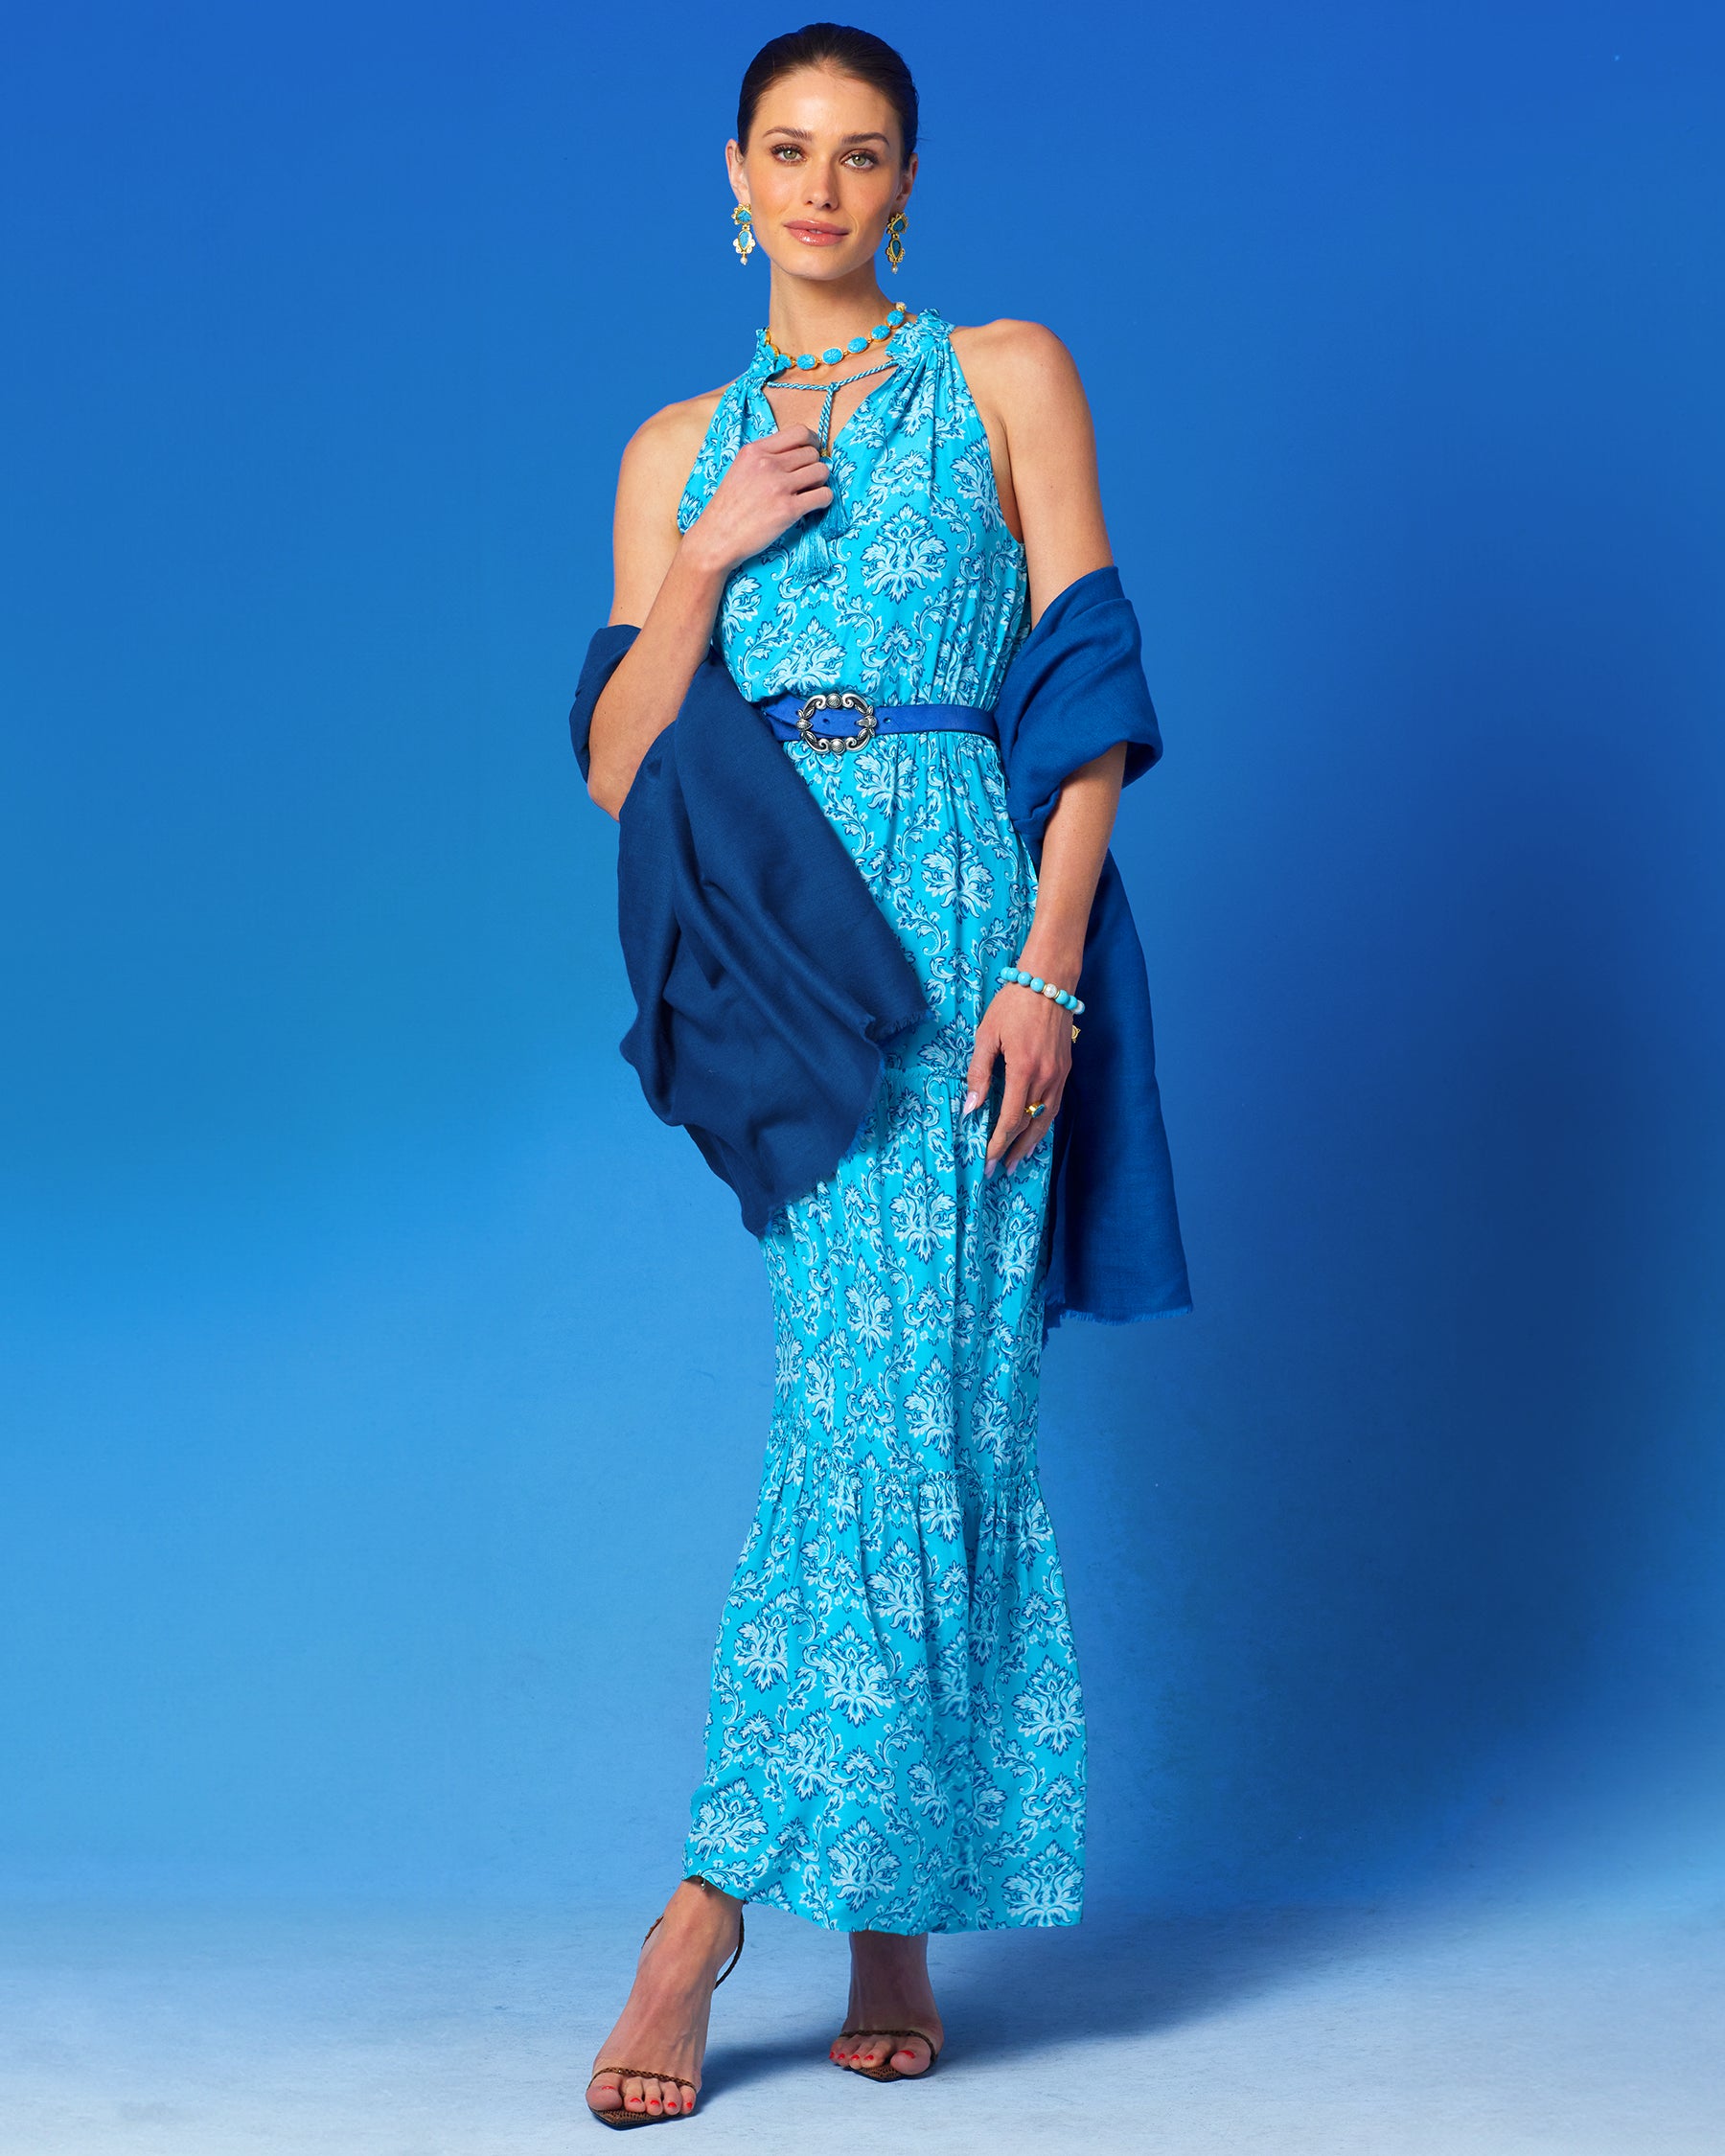 Bailey Halterneck Maxi Dress in Turquoise Baroque Florals worn with a navy blue pashmina shawl